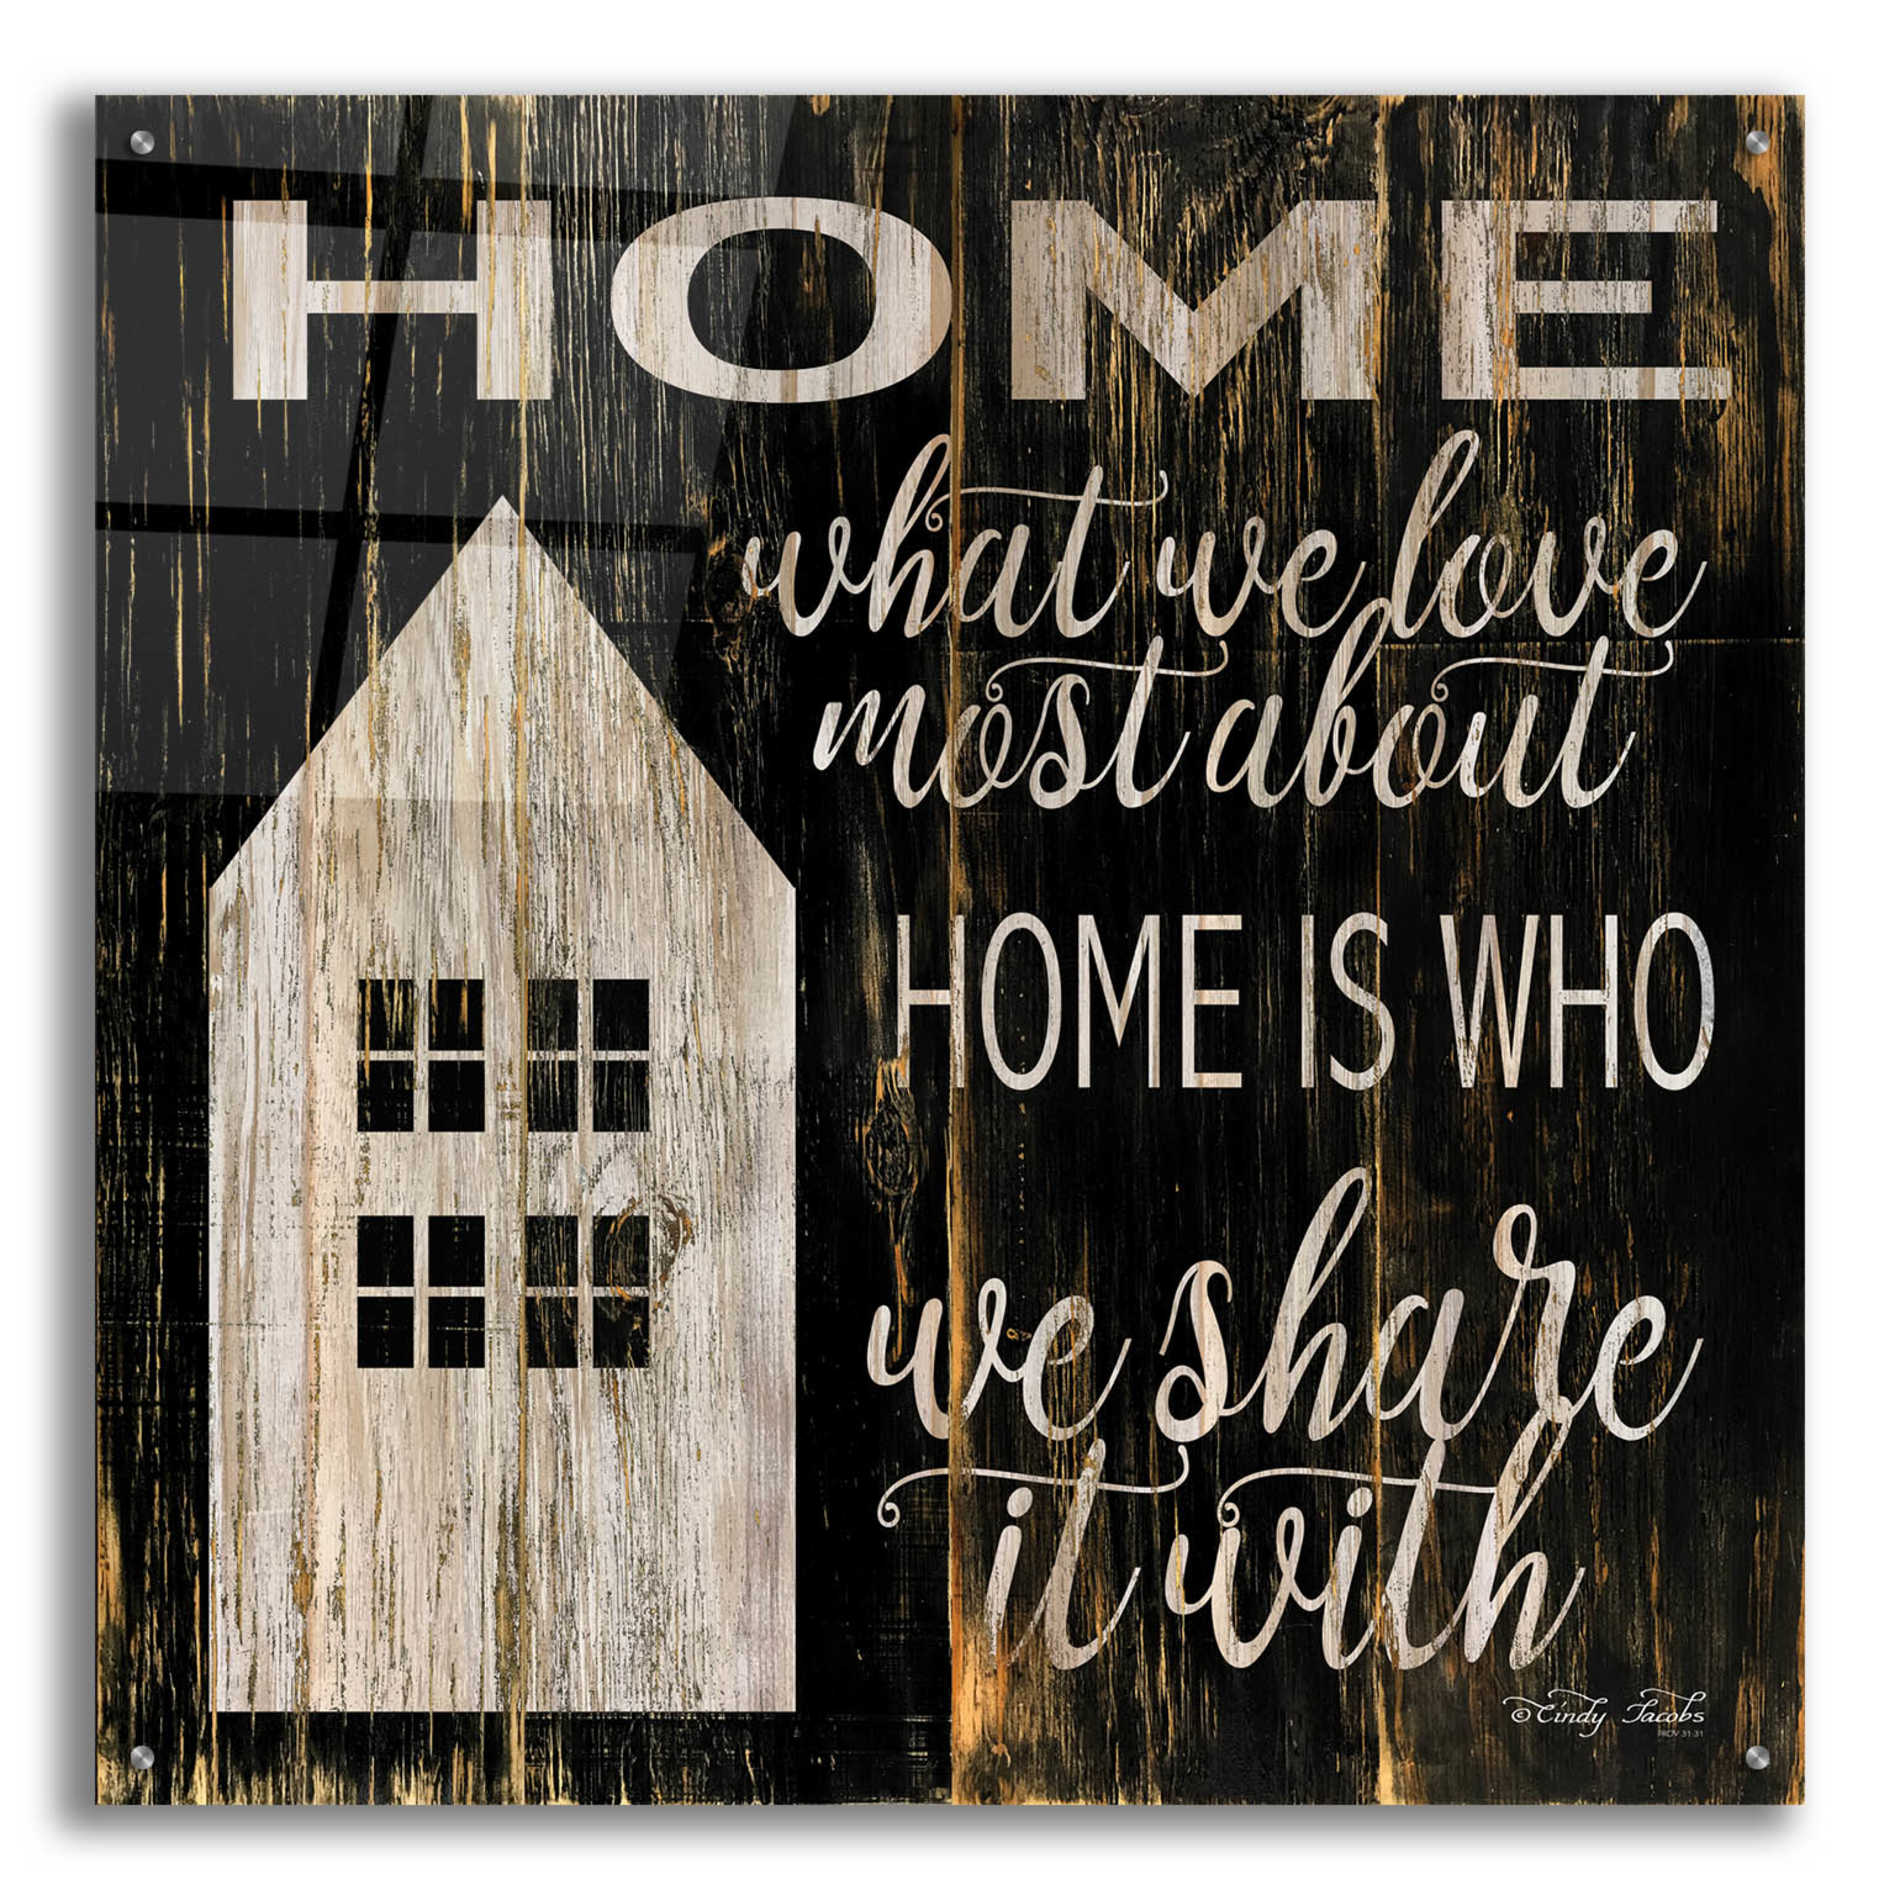 Epic Art 'Home is Who We Share It With' by Cindy Jacobs, Acrylic Glass Wall Art,36x36